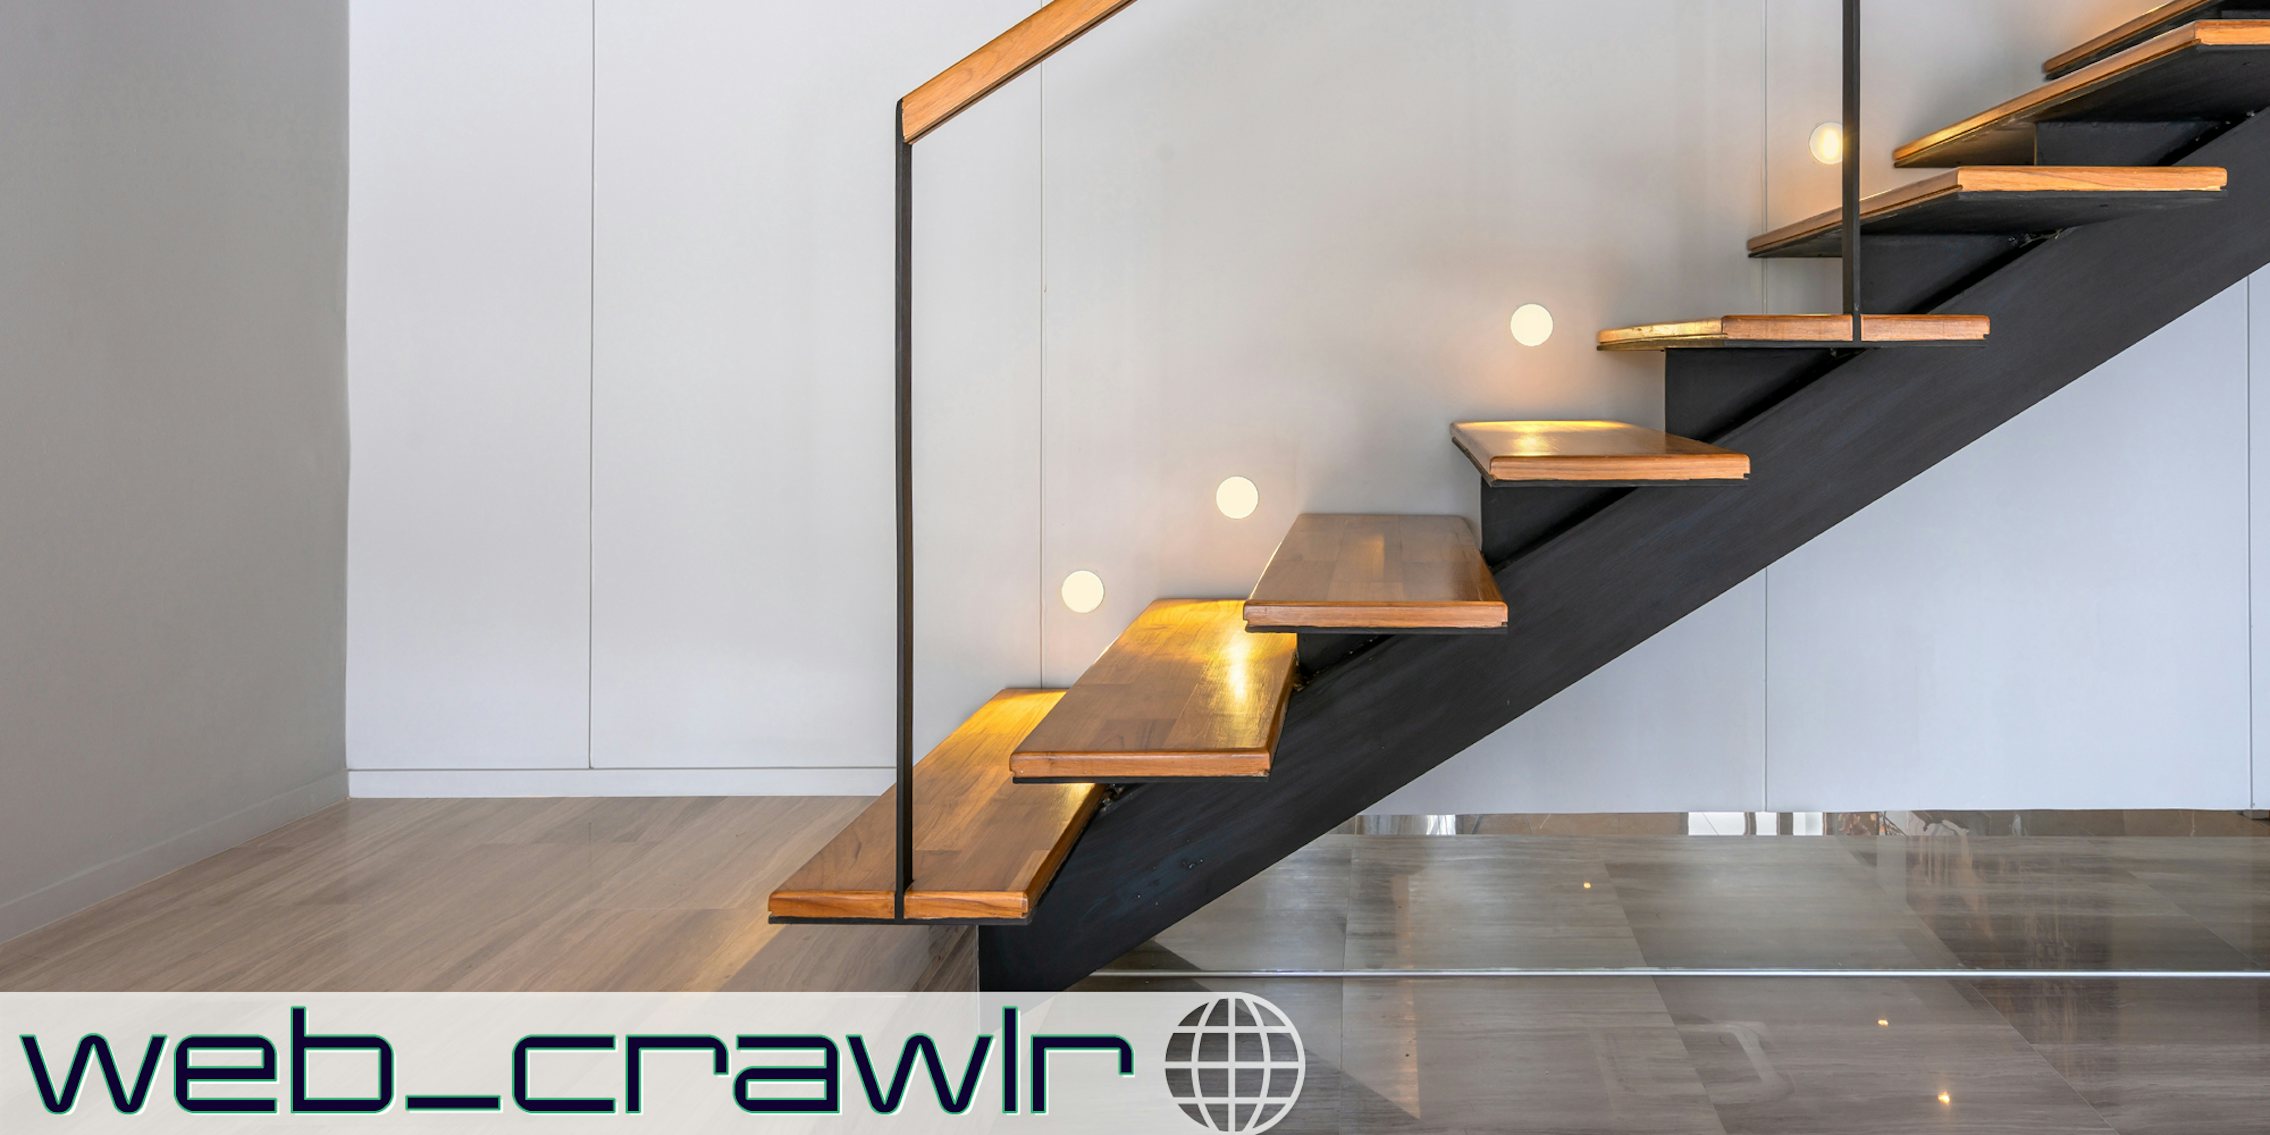 A staircase. The Daily Dot newsletter web_crawlr logo is in the bottom left corner.